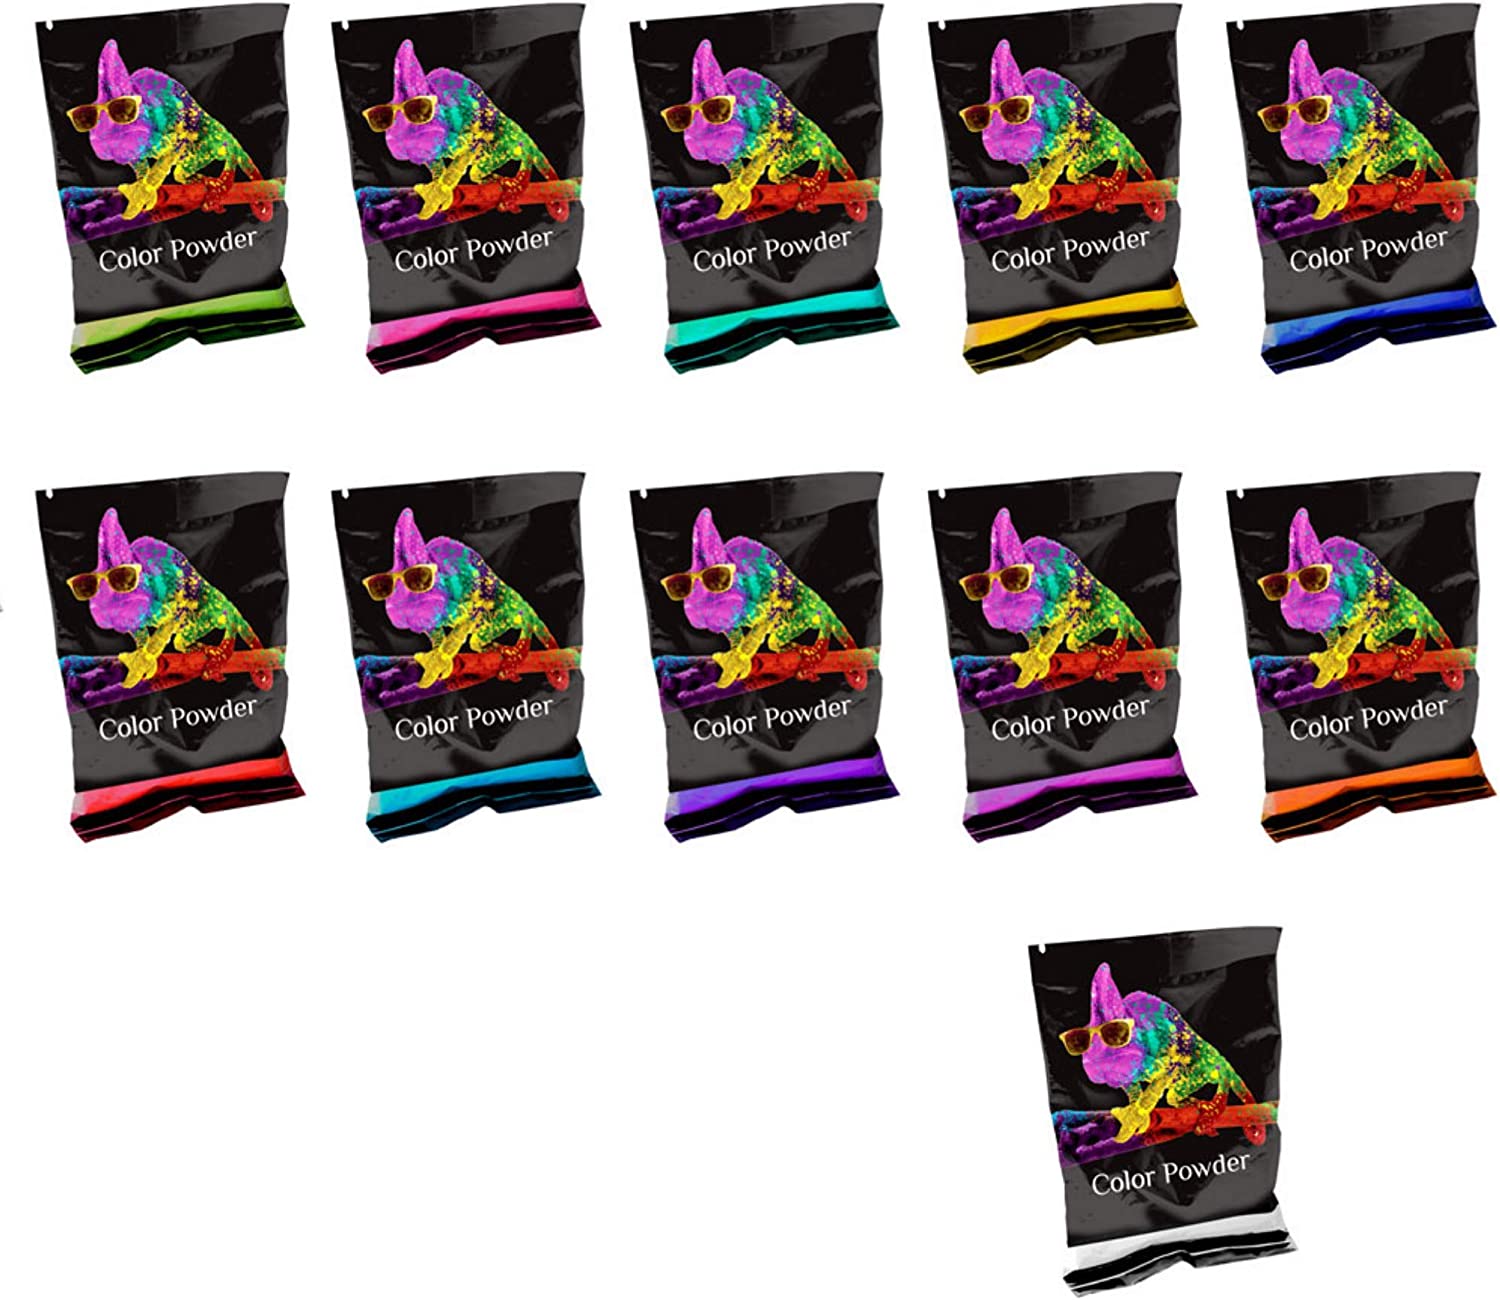 Color Powder 70 Gram Individual Packets by Chameleon Colors, 10 Pack Plus Bonus White, Perfect for 3-5 People, Red, Yellow, Blue, Orange, Purple, Pink, Navy, Magenta, Aquamarine, and Green Powder